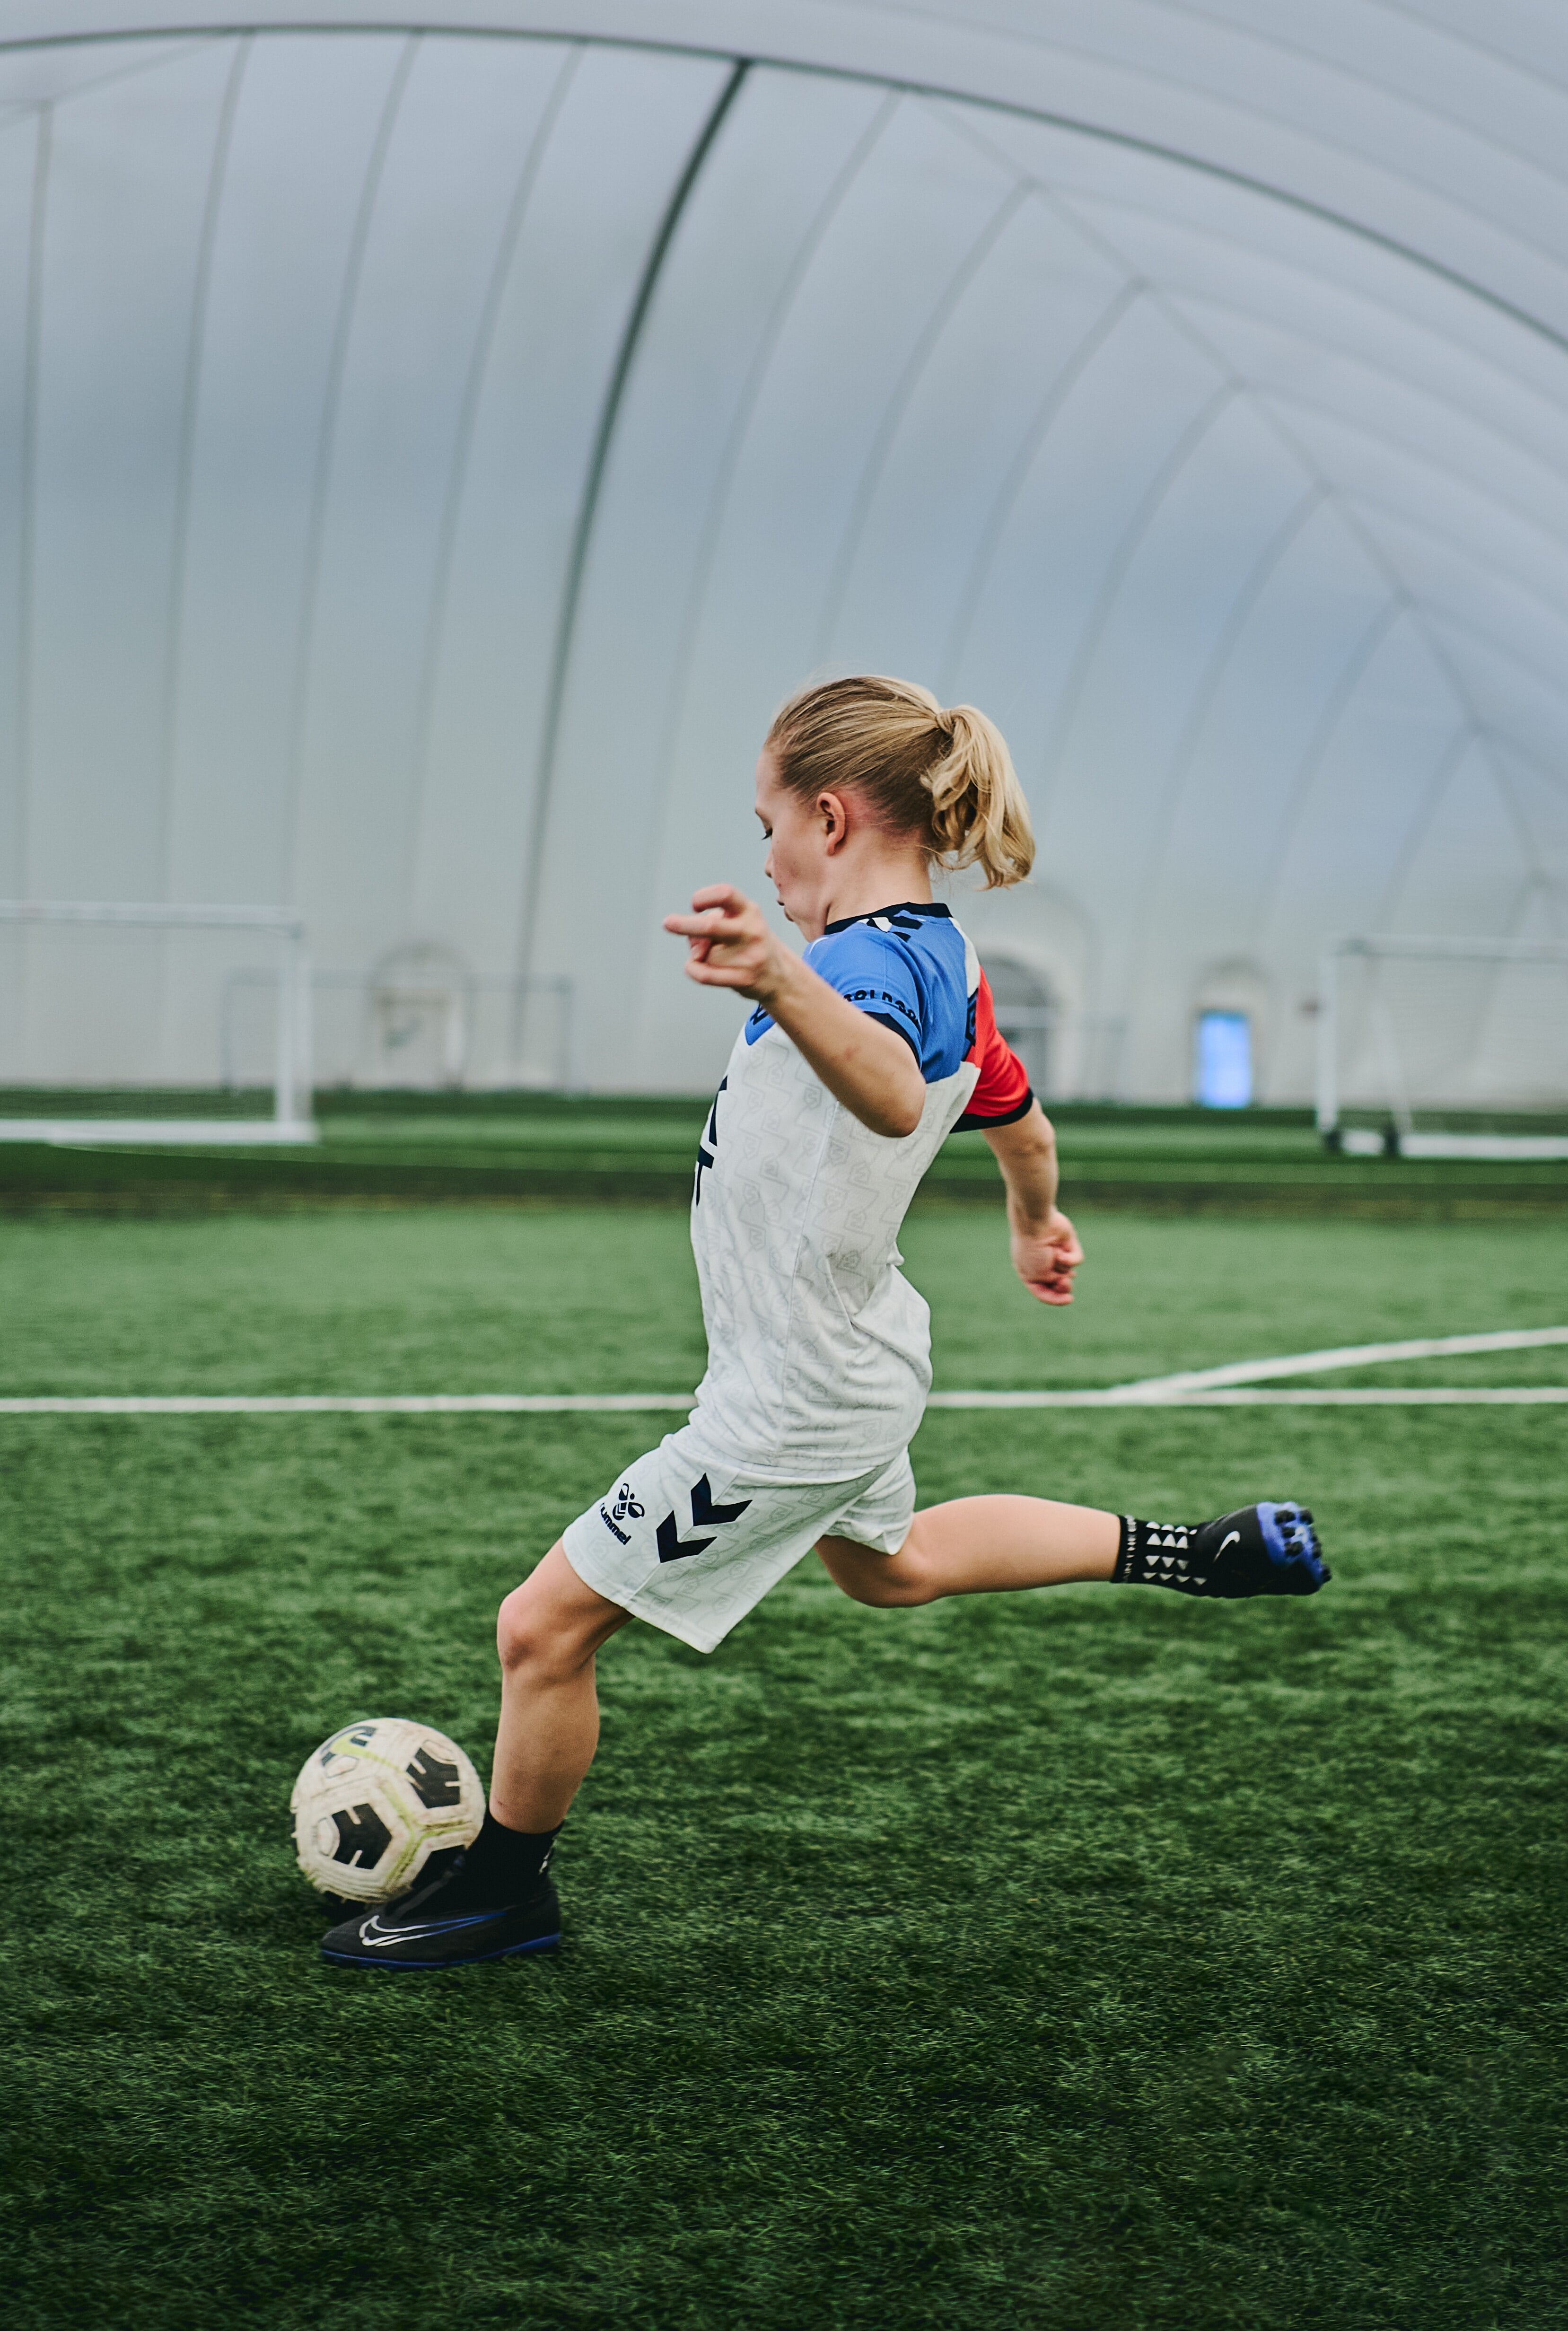 Ballerz Academy (Girls Only Football Sessions)